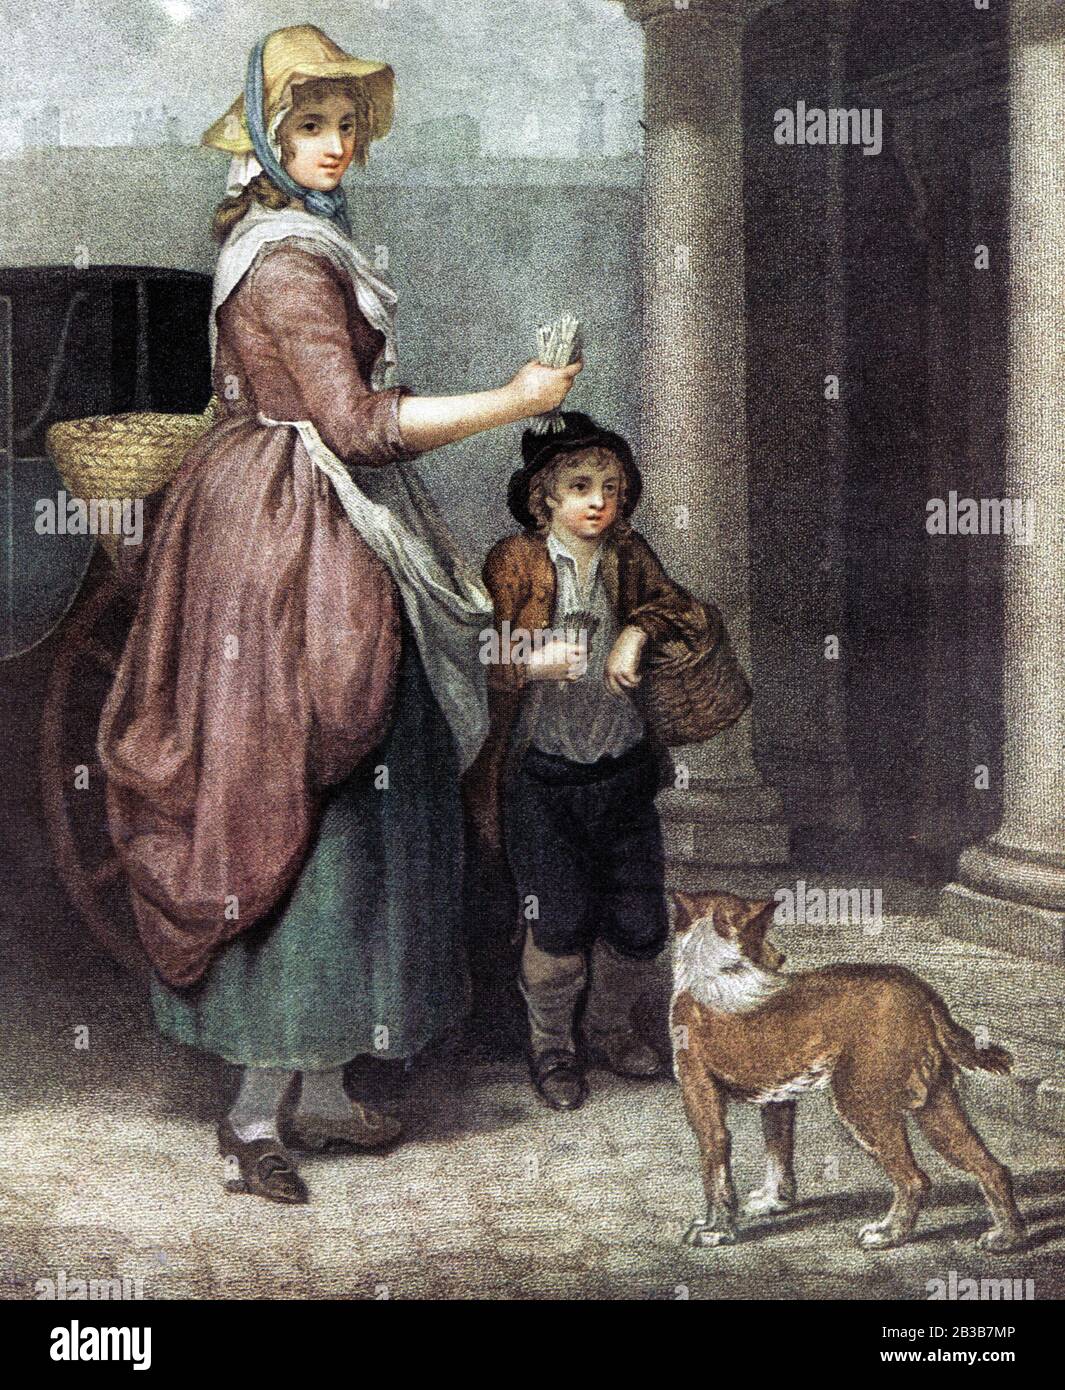 Match (lucifer) sellers   1794. One of the many English street seller trades of the 18th century - A mother and son sell matches door to door Matches were considered difficult to sell to householders so women and children were often employed as they tended to get more sympathy from potential buyers. Matches were sometimes called' fuzees' , German 'tinders' or simply 'lights' and were also sold at fairs, from stall,on boat landings and in inns and taverns. Stock Photo